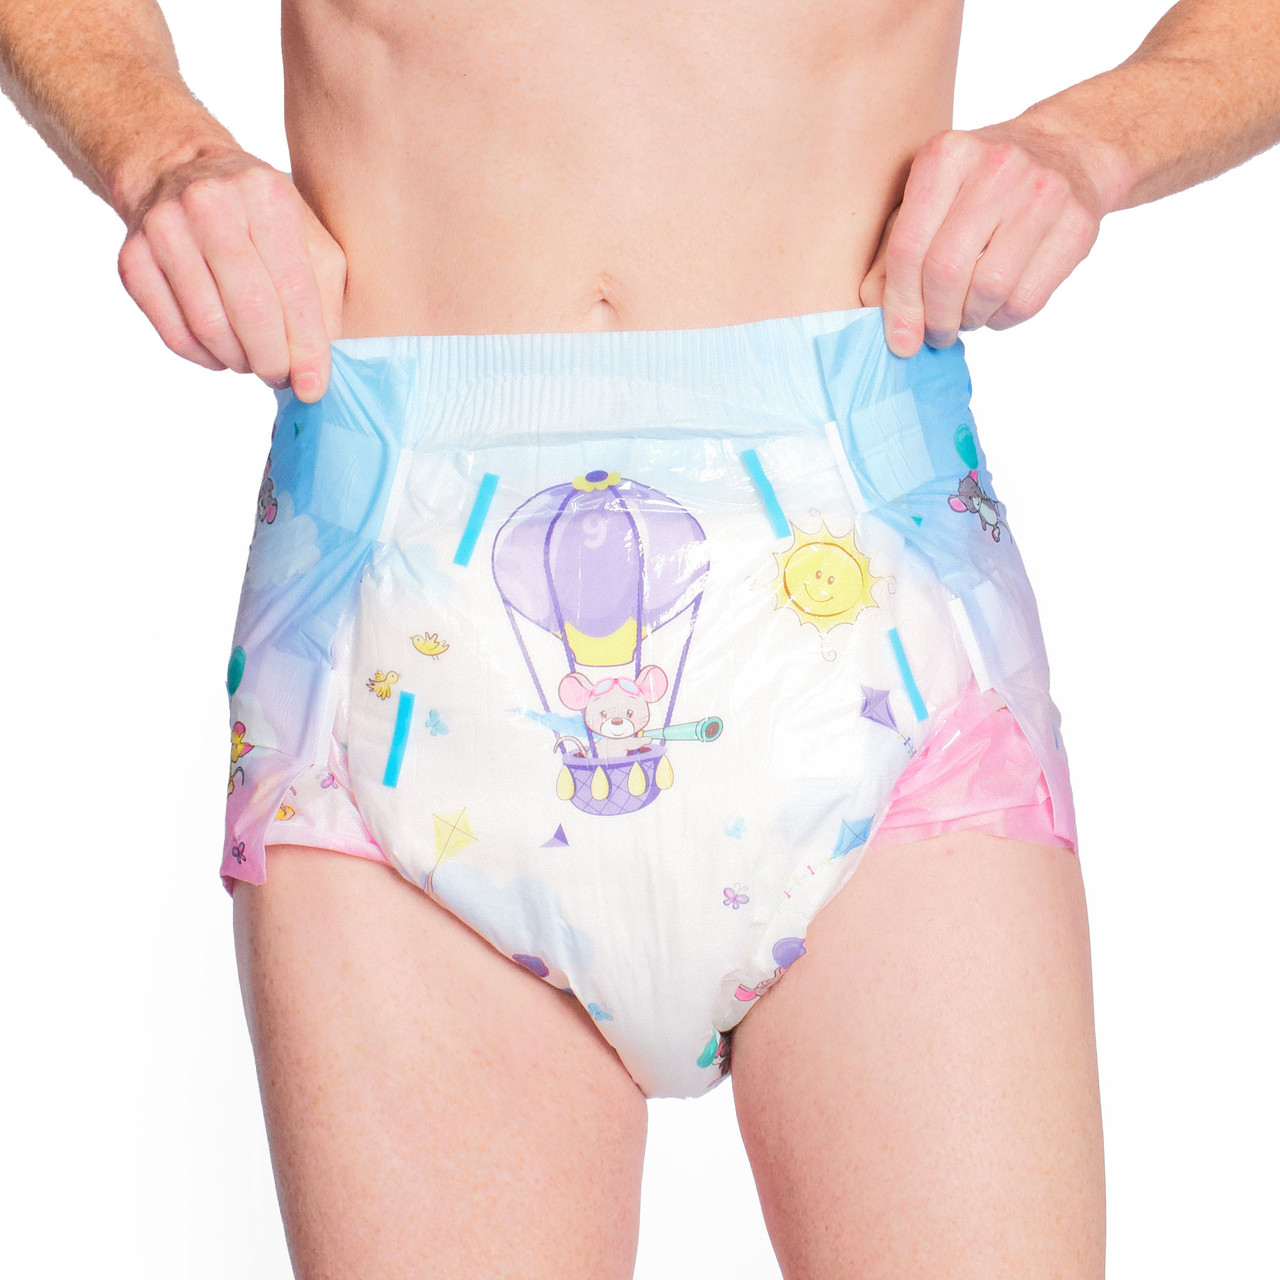 Drift Off Into A Dream With Rearz New Daydreamer Adult Diapers #abdldiaper # rearz #daydreamer 